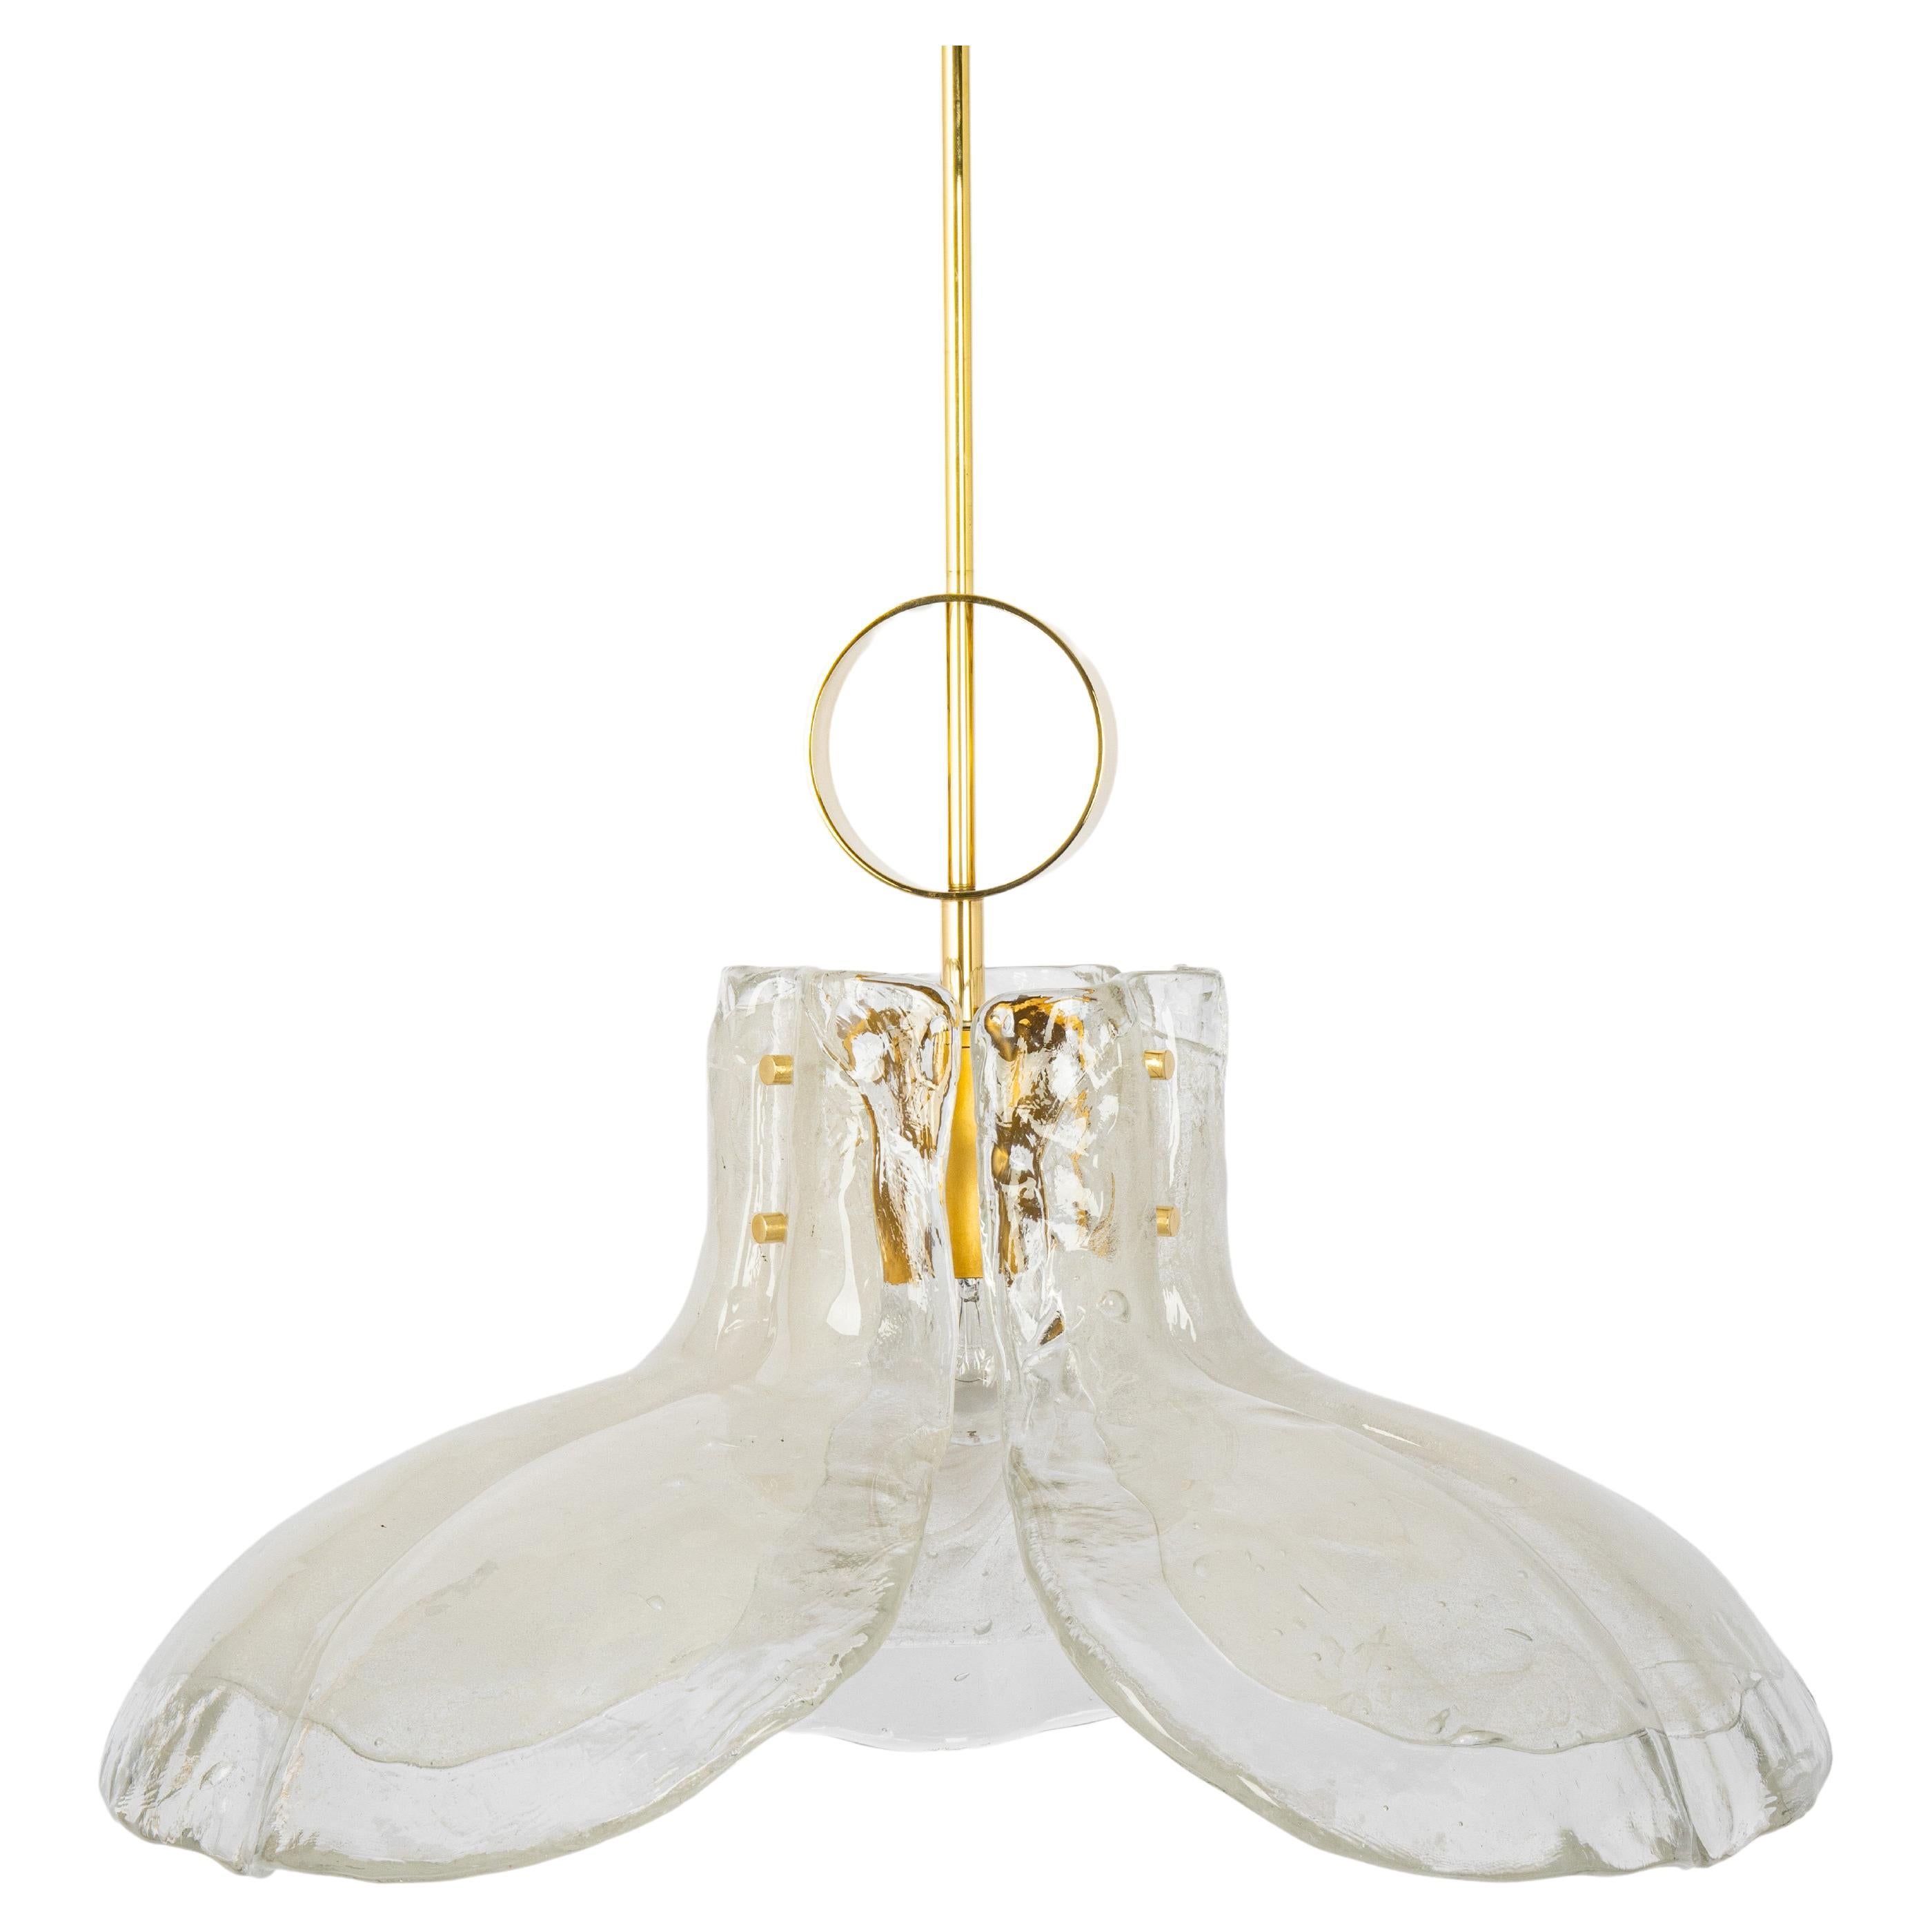 1 of 2 Murano Glass Chandelier Designed by Kalmar, Germany, 1960s For Sale